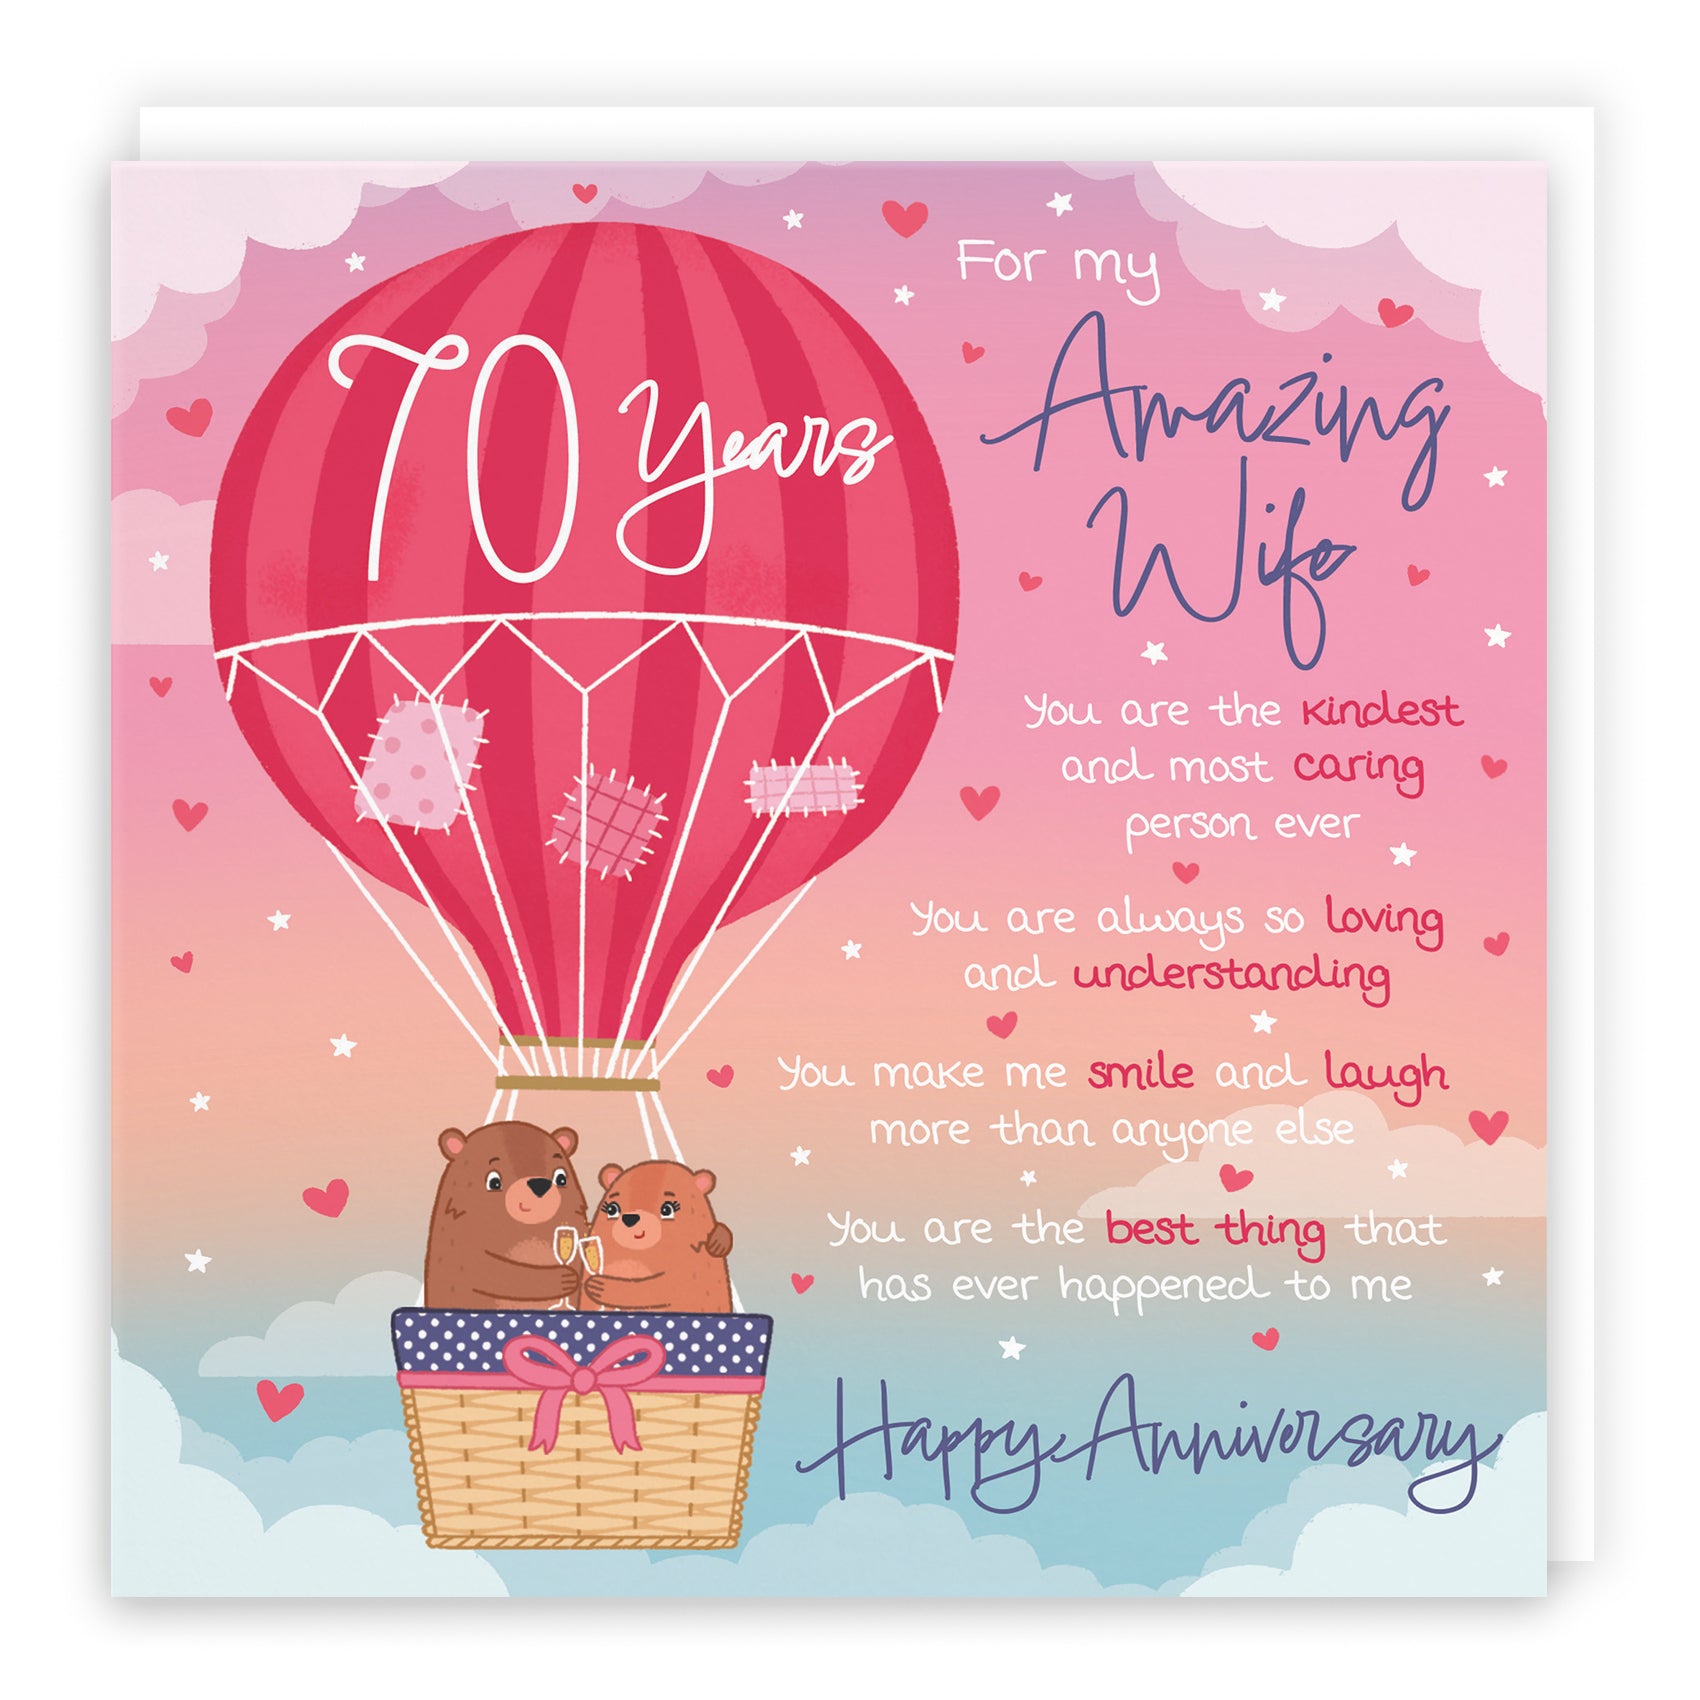 Wife 70th Anniversary Poem Card Love Is In The Air Cute Bears